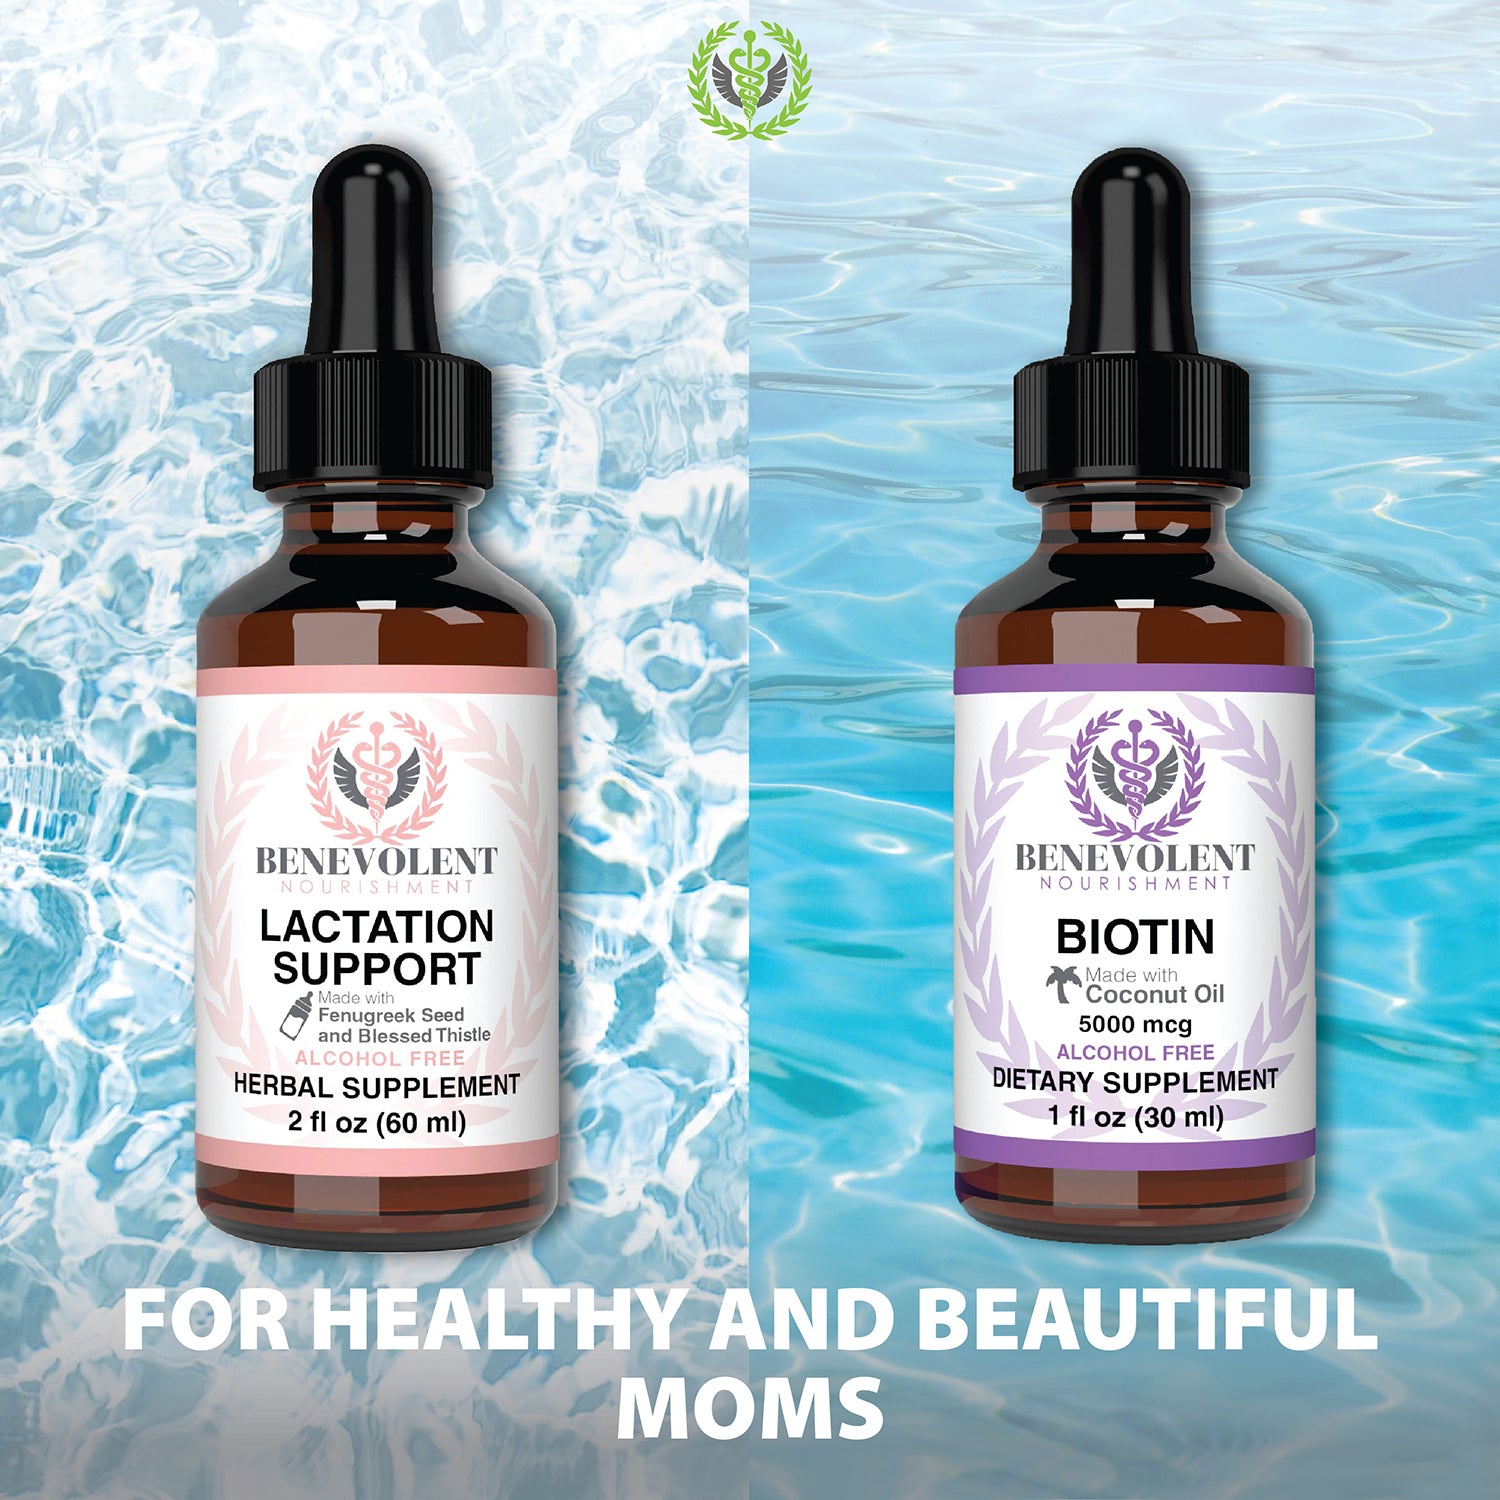 Lactation Support and Biotin